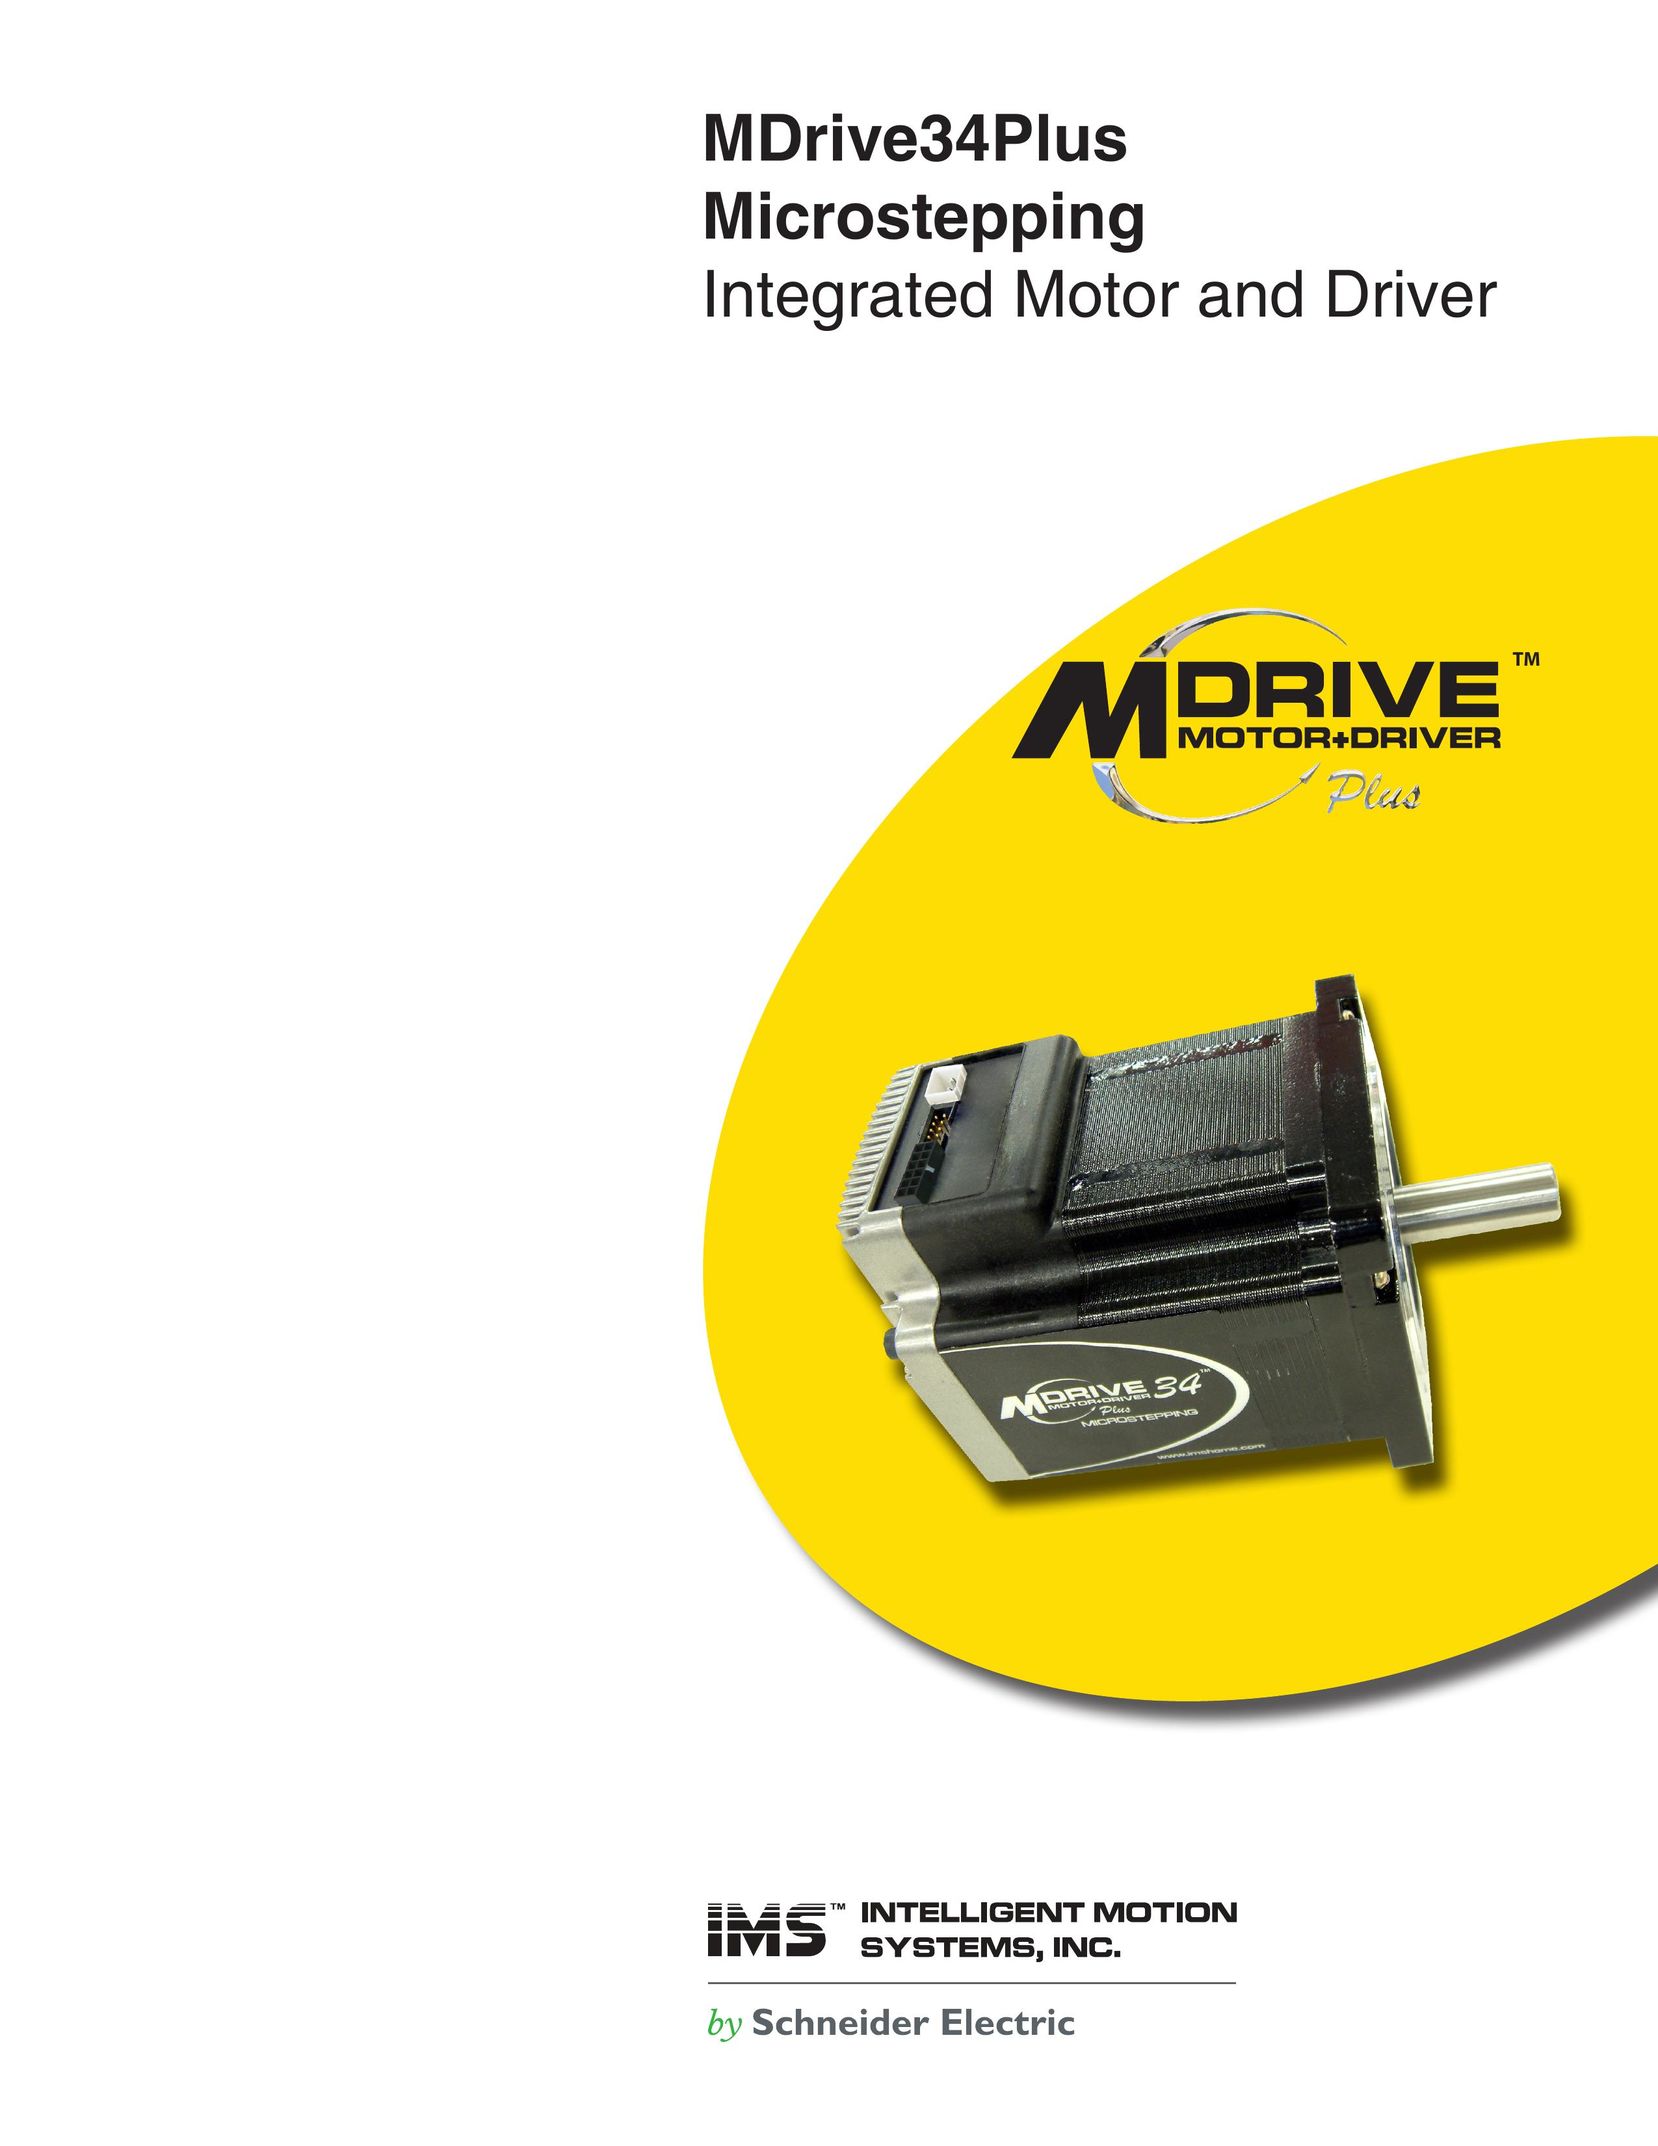 Intelligent Motion Systems MDrive34Plus Home Safety Product User Manual